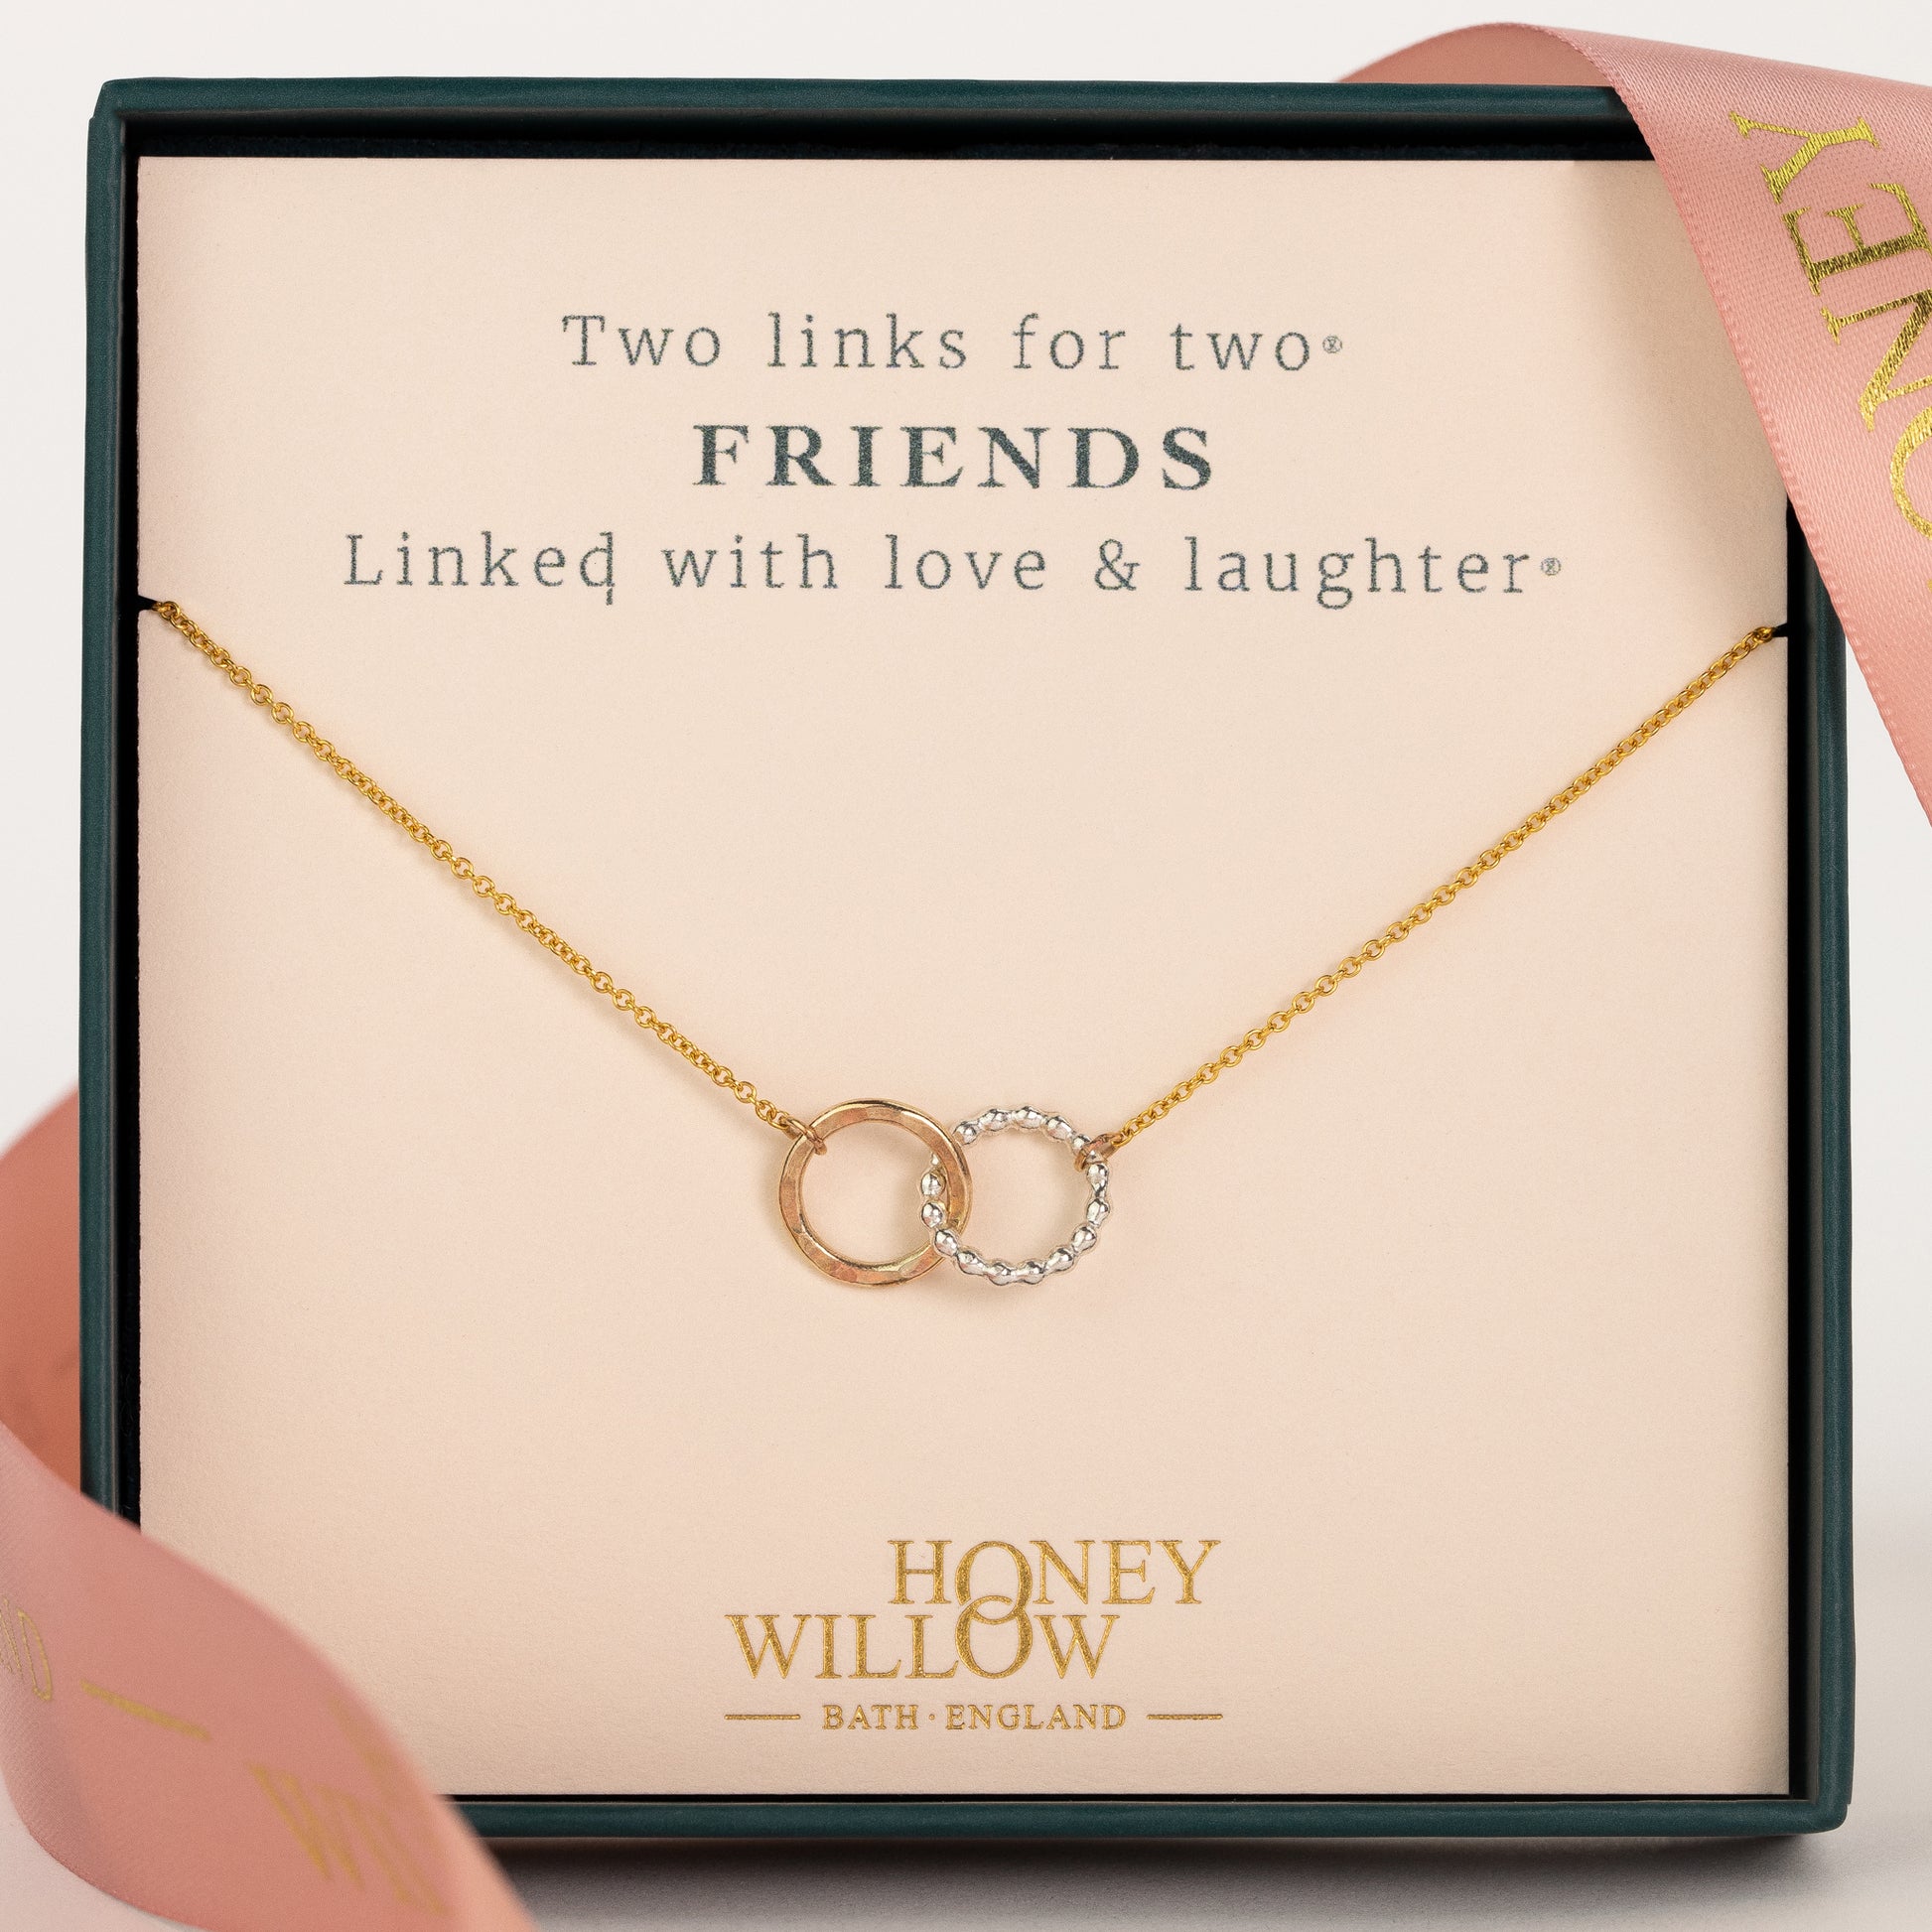 Gift for Friend - Love Link Necklace - Silver & Gold